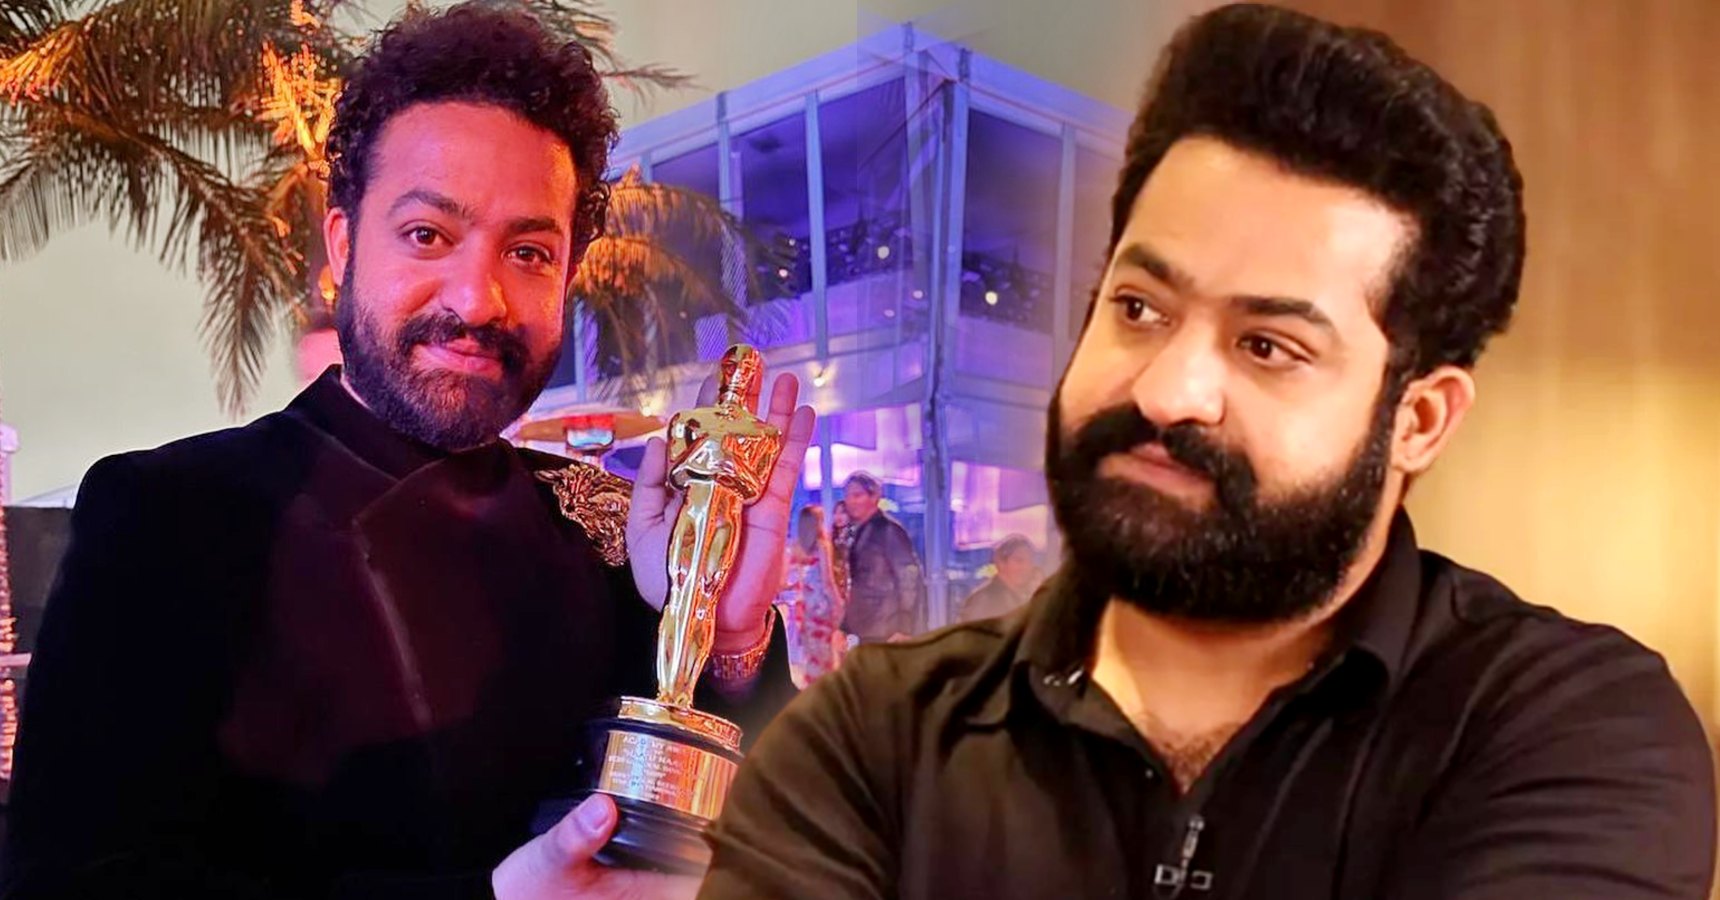 RRR star Jr NTR says he will stop acting if fans keep asking him about his next film